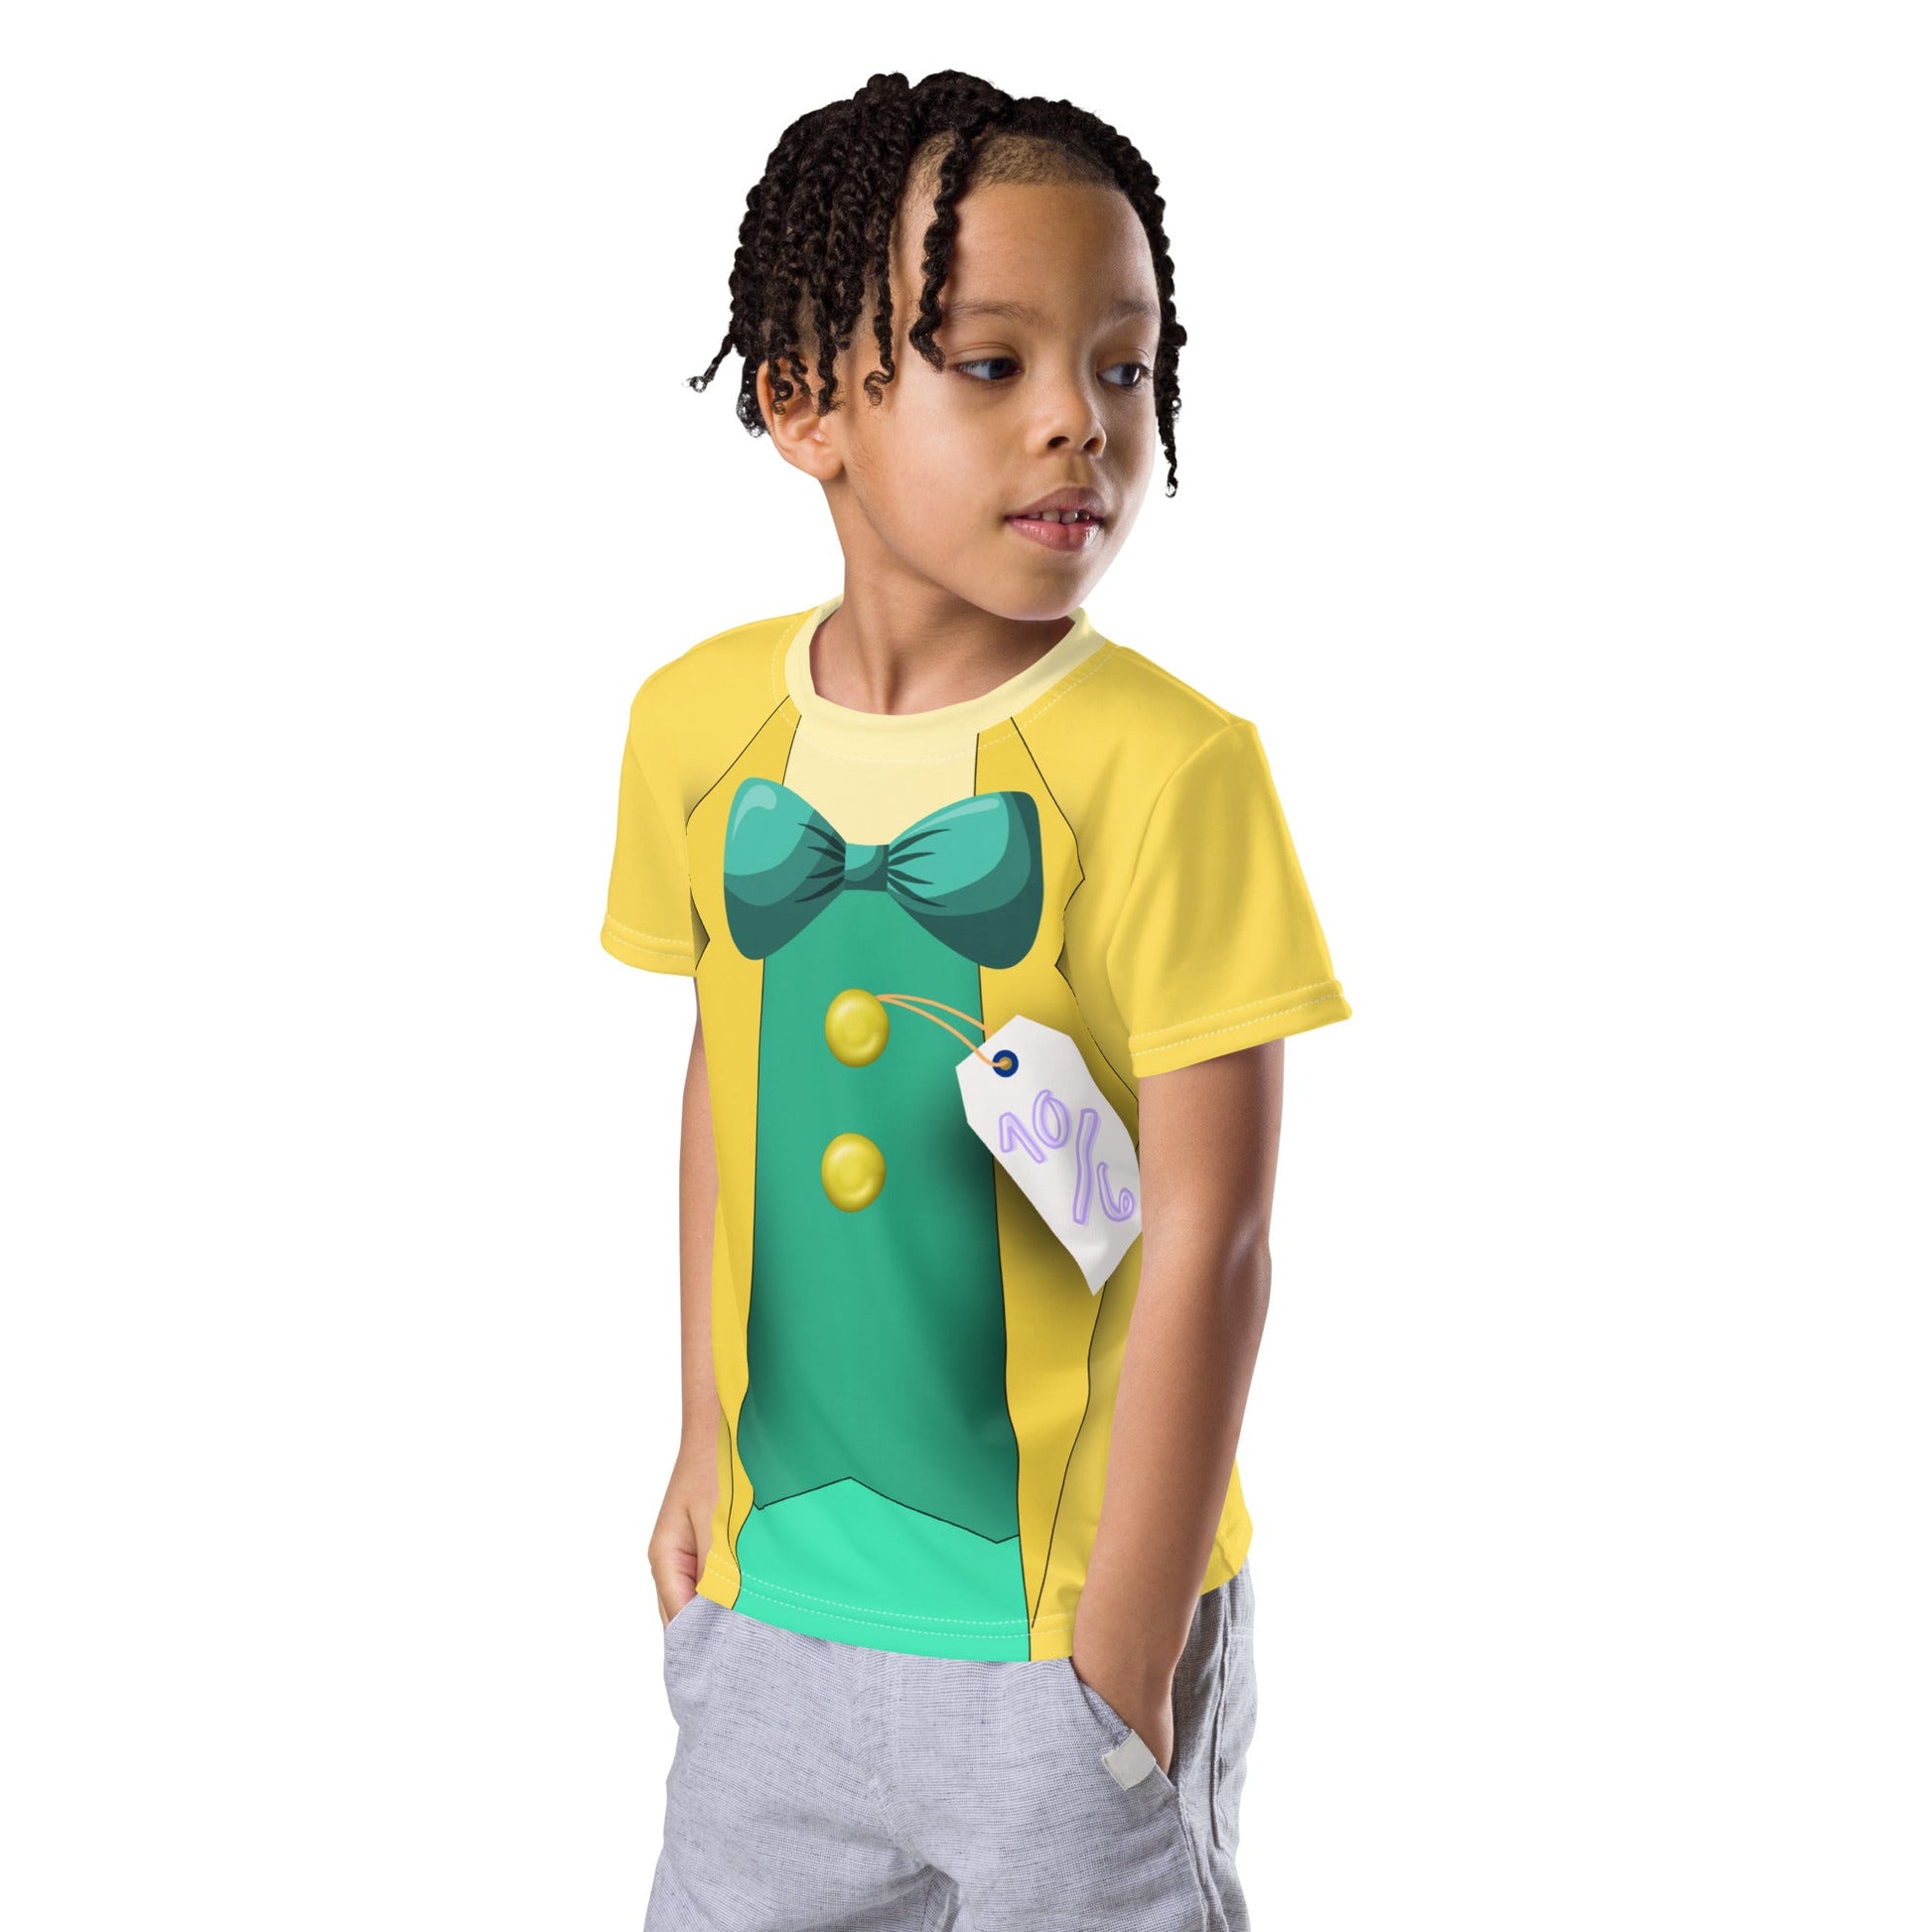 Crazy Hatter Kids crew neck t-shirt active wearalicealice in wonderland#tag4##tag5##tag6#